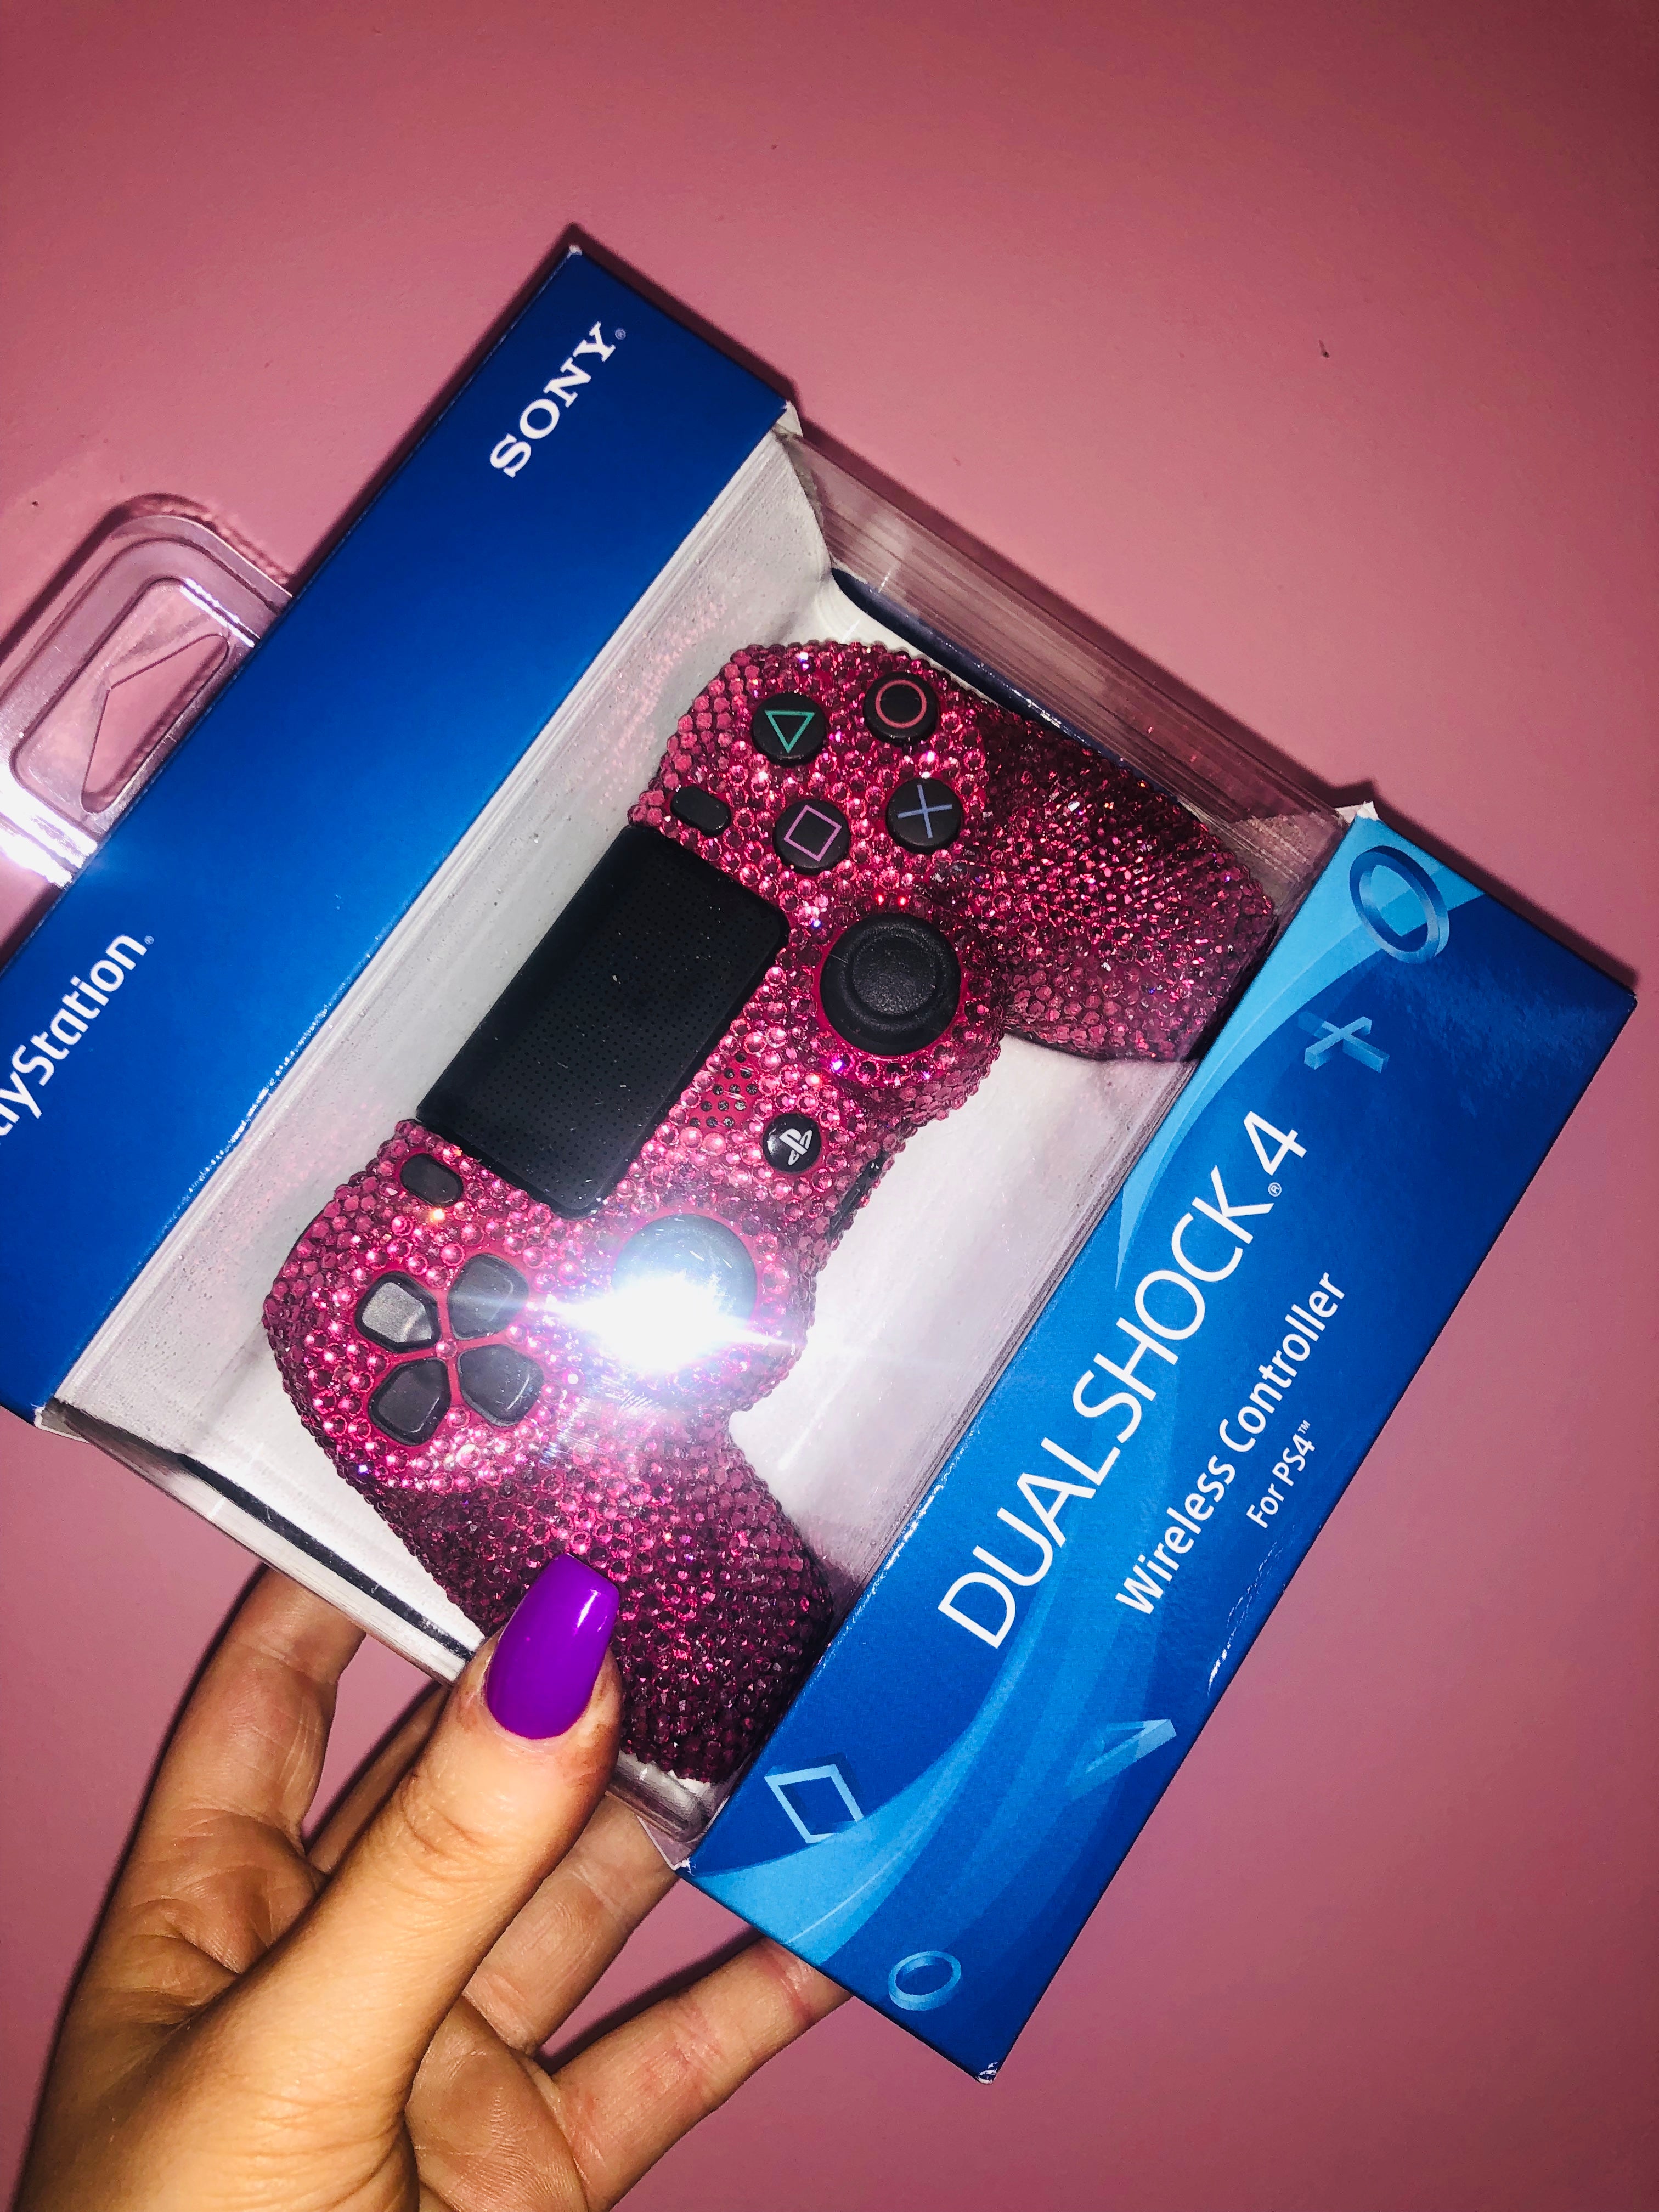 Ps5 Bling Controller 